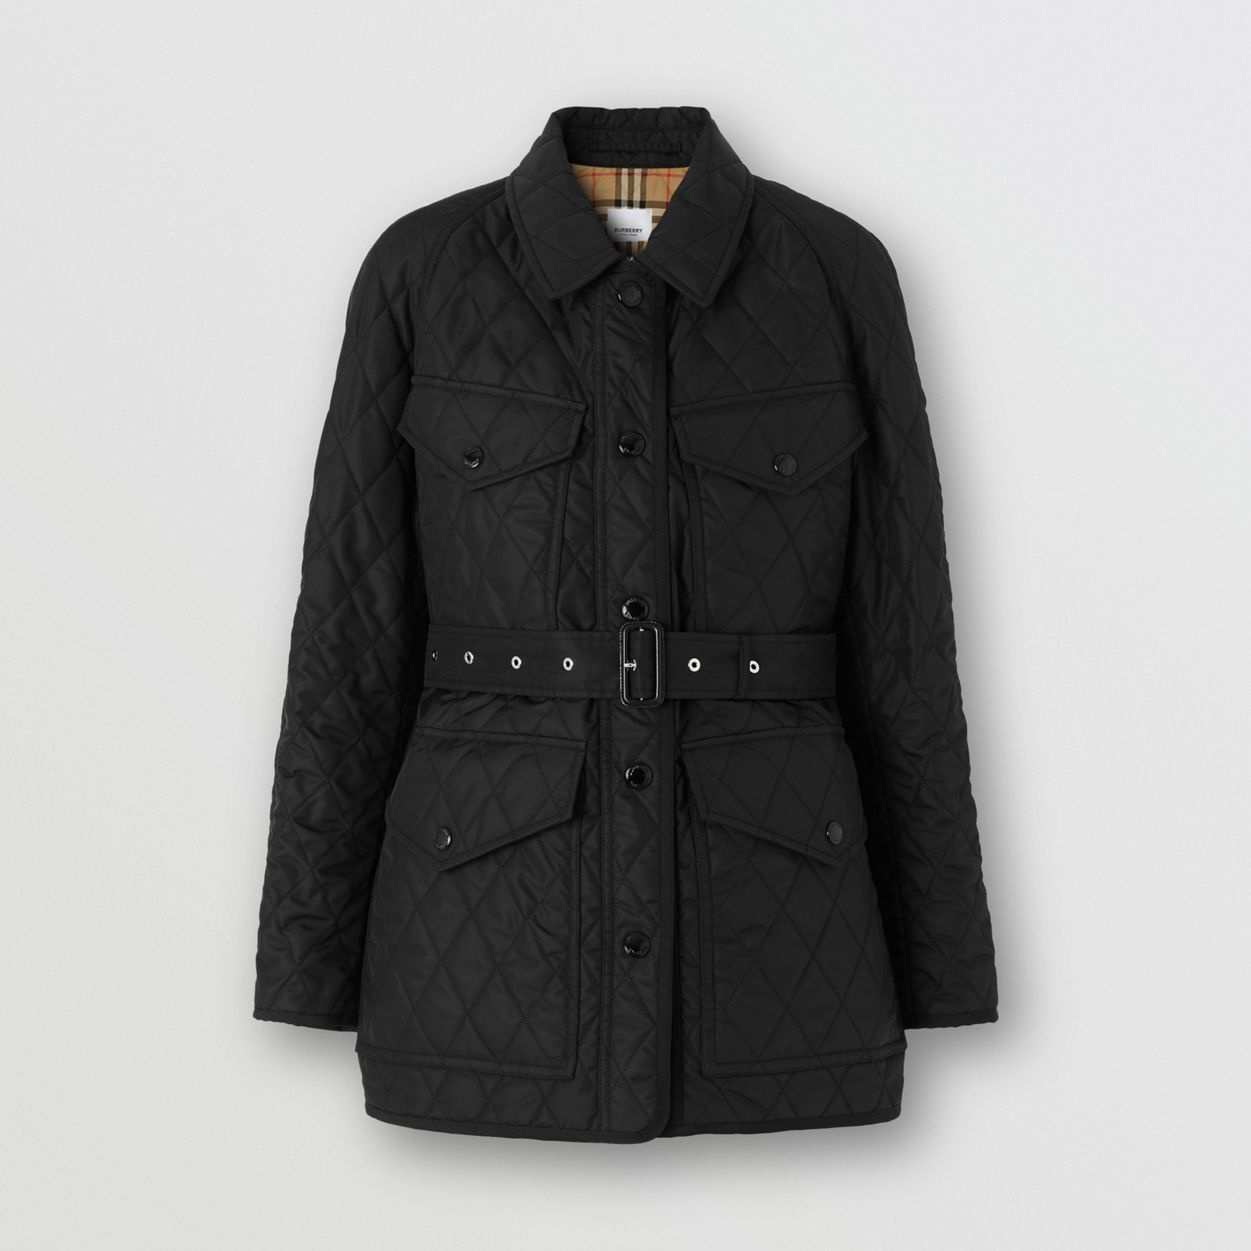 Diamond Quilted Nylon Canvas Field Jacket - 1